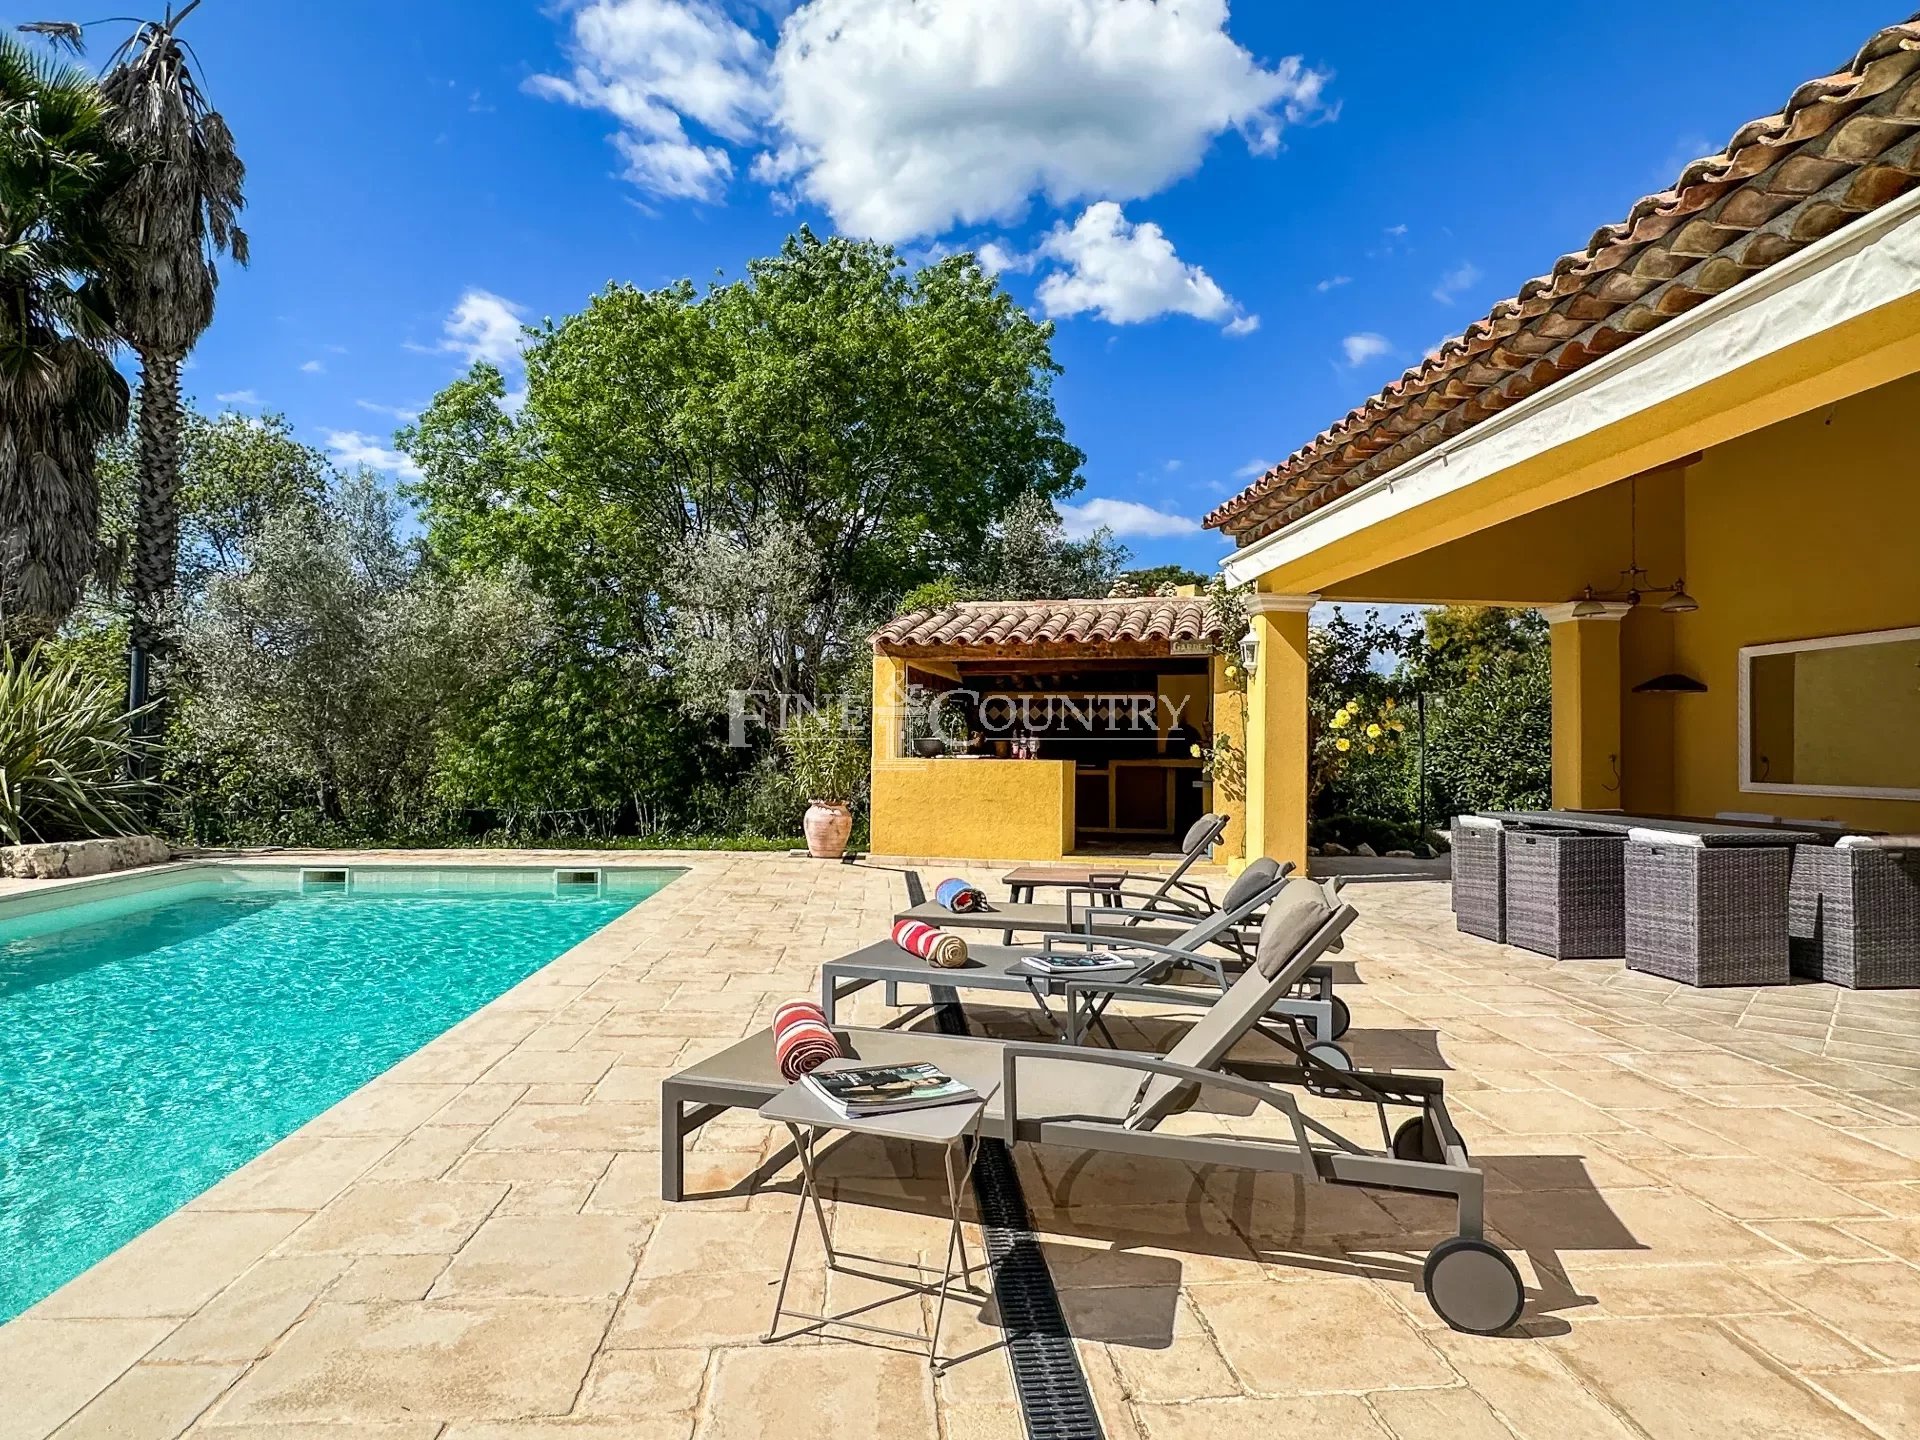 Photo of Elegant Villa with Pool for Sale in Quiet Residential area of Vence